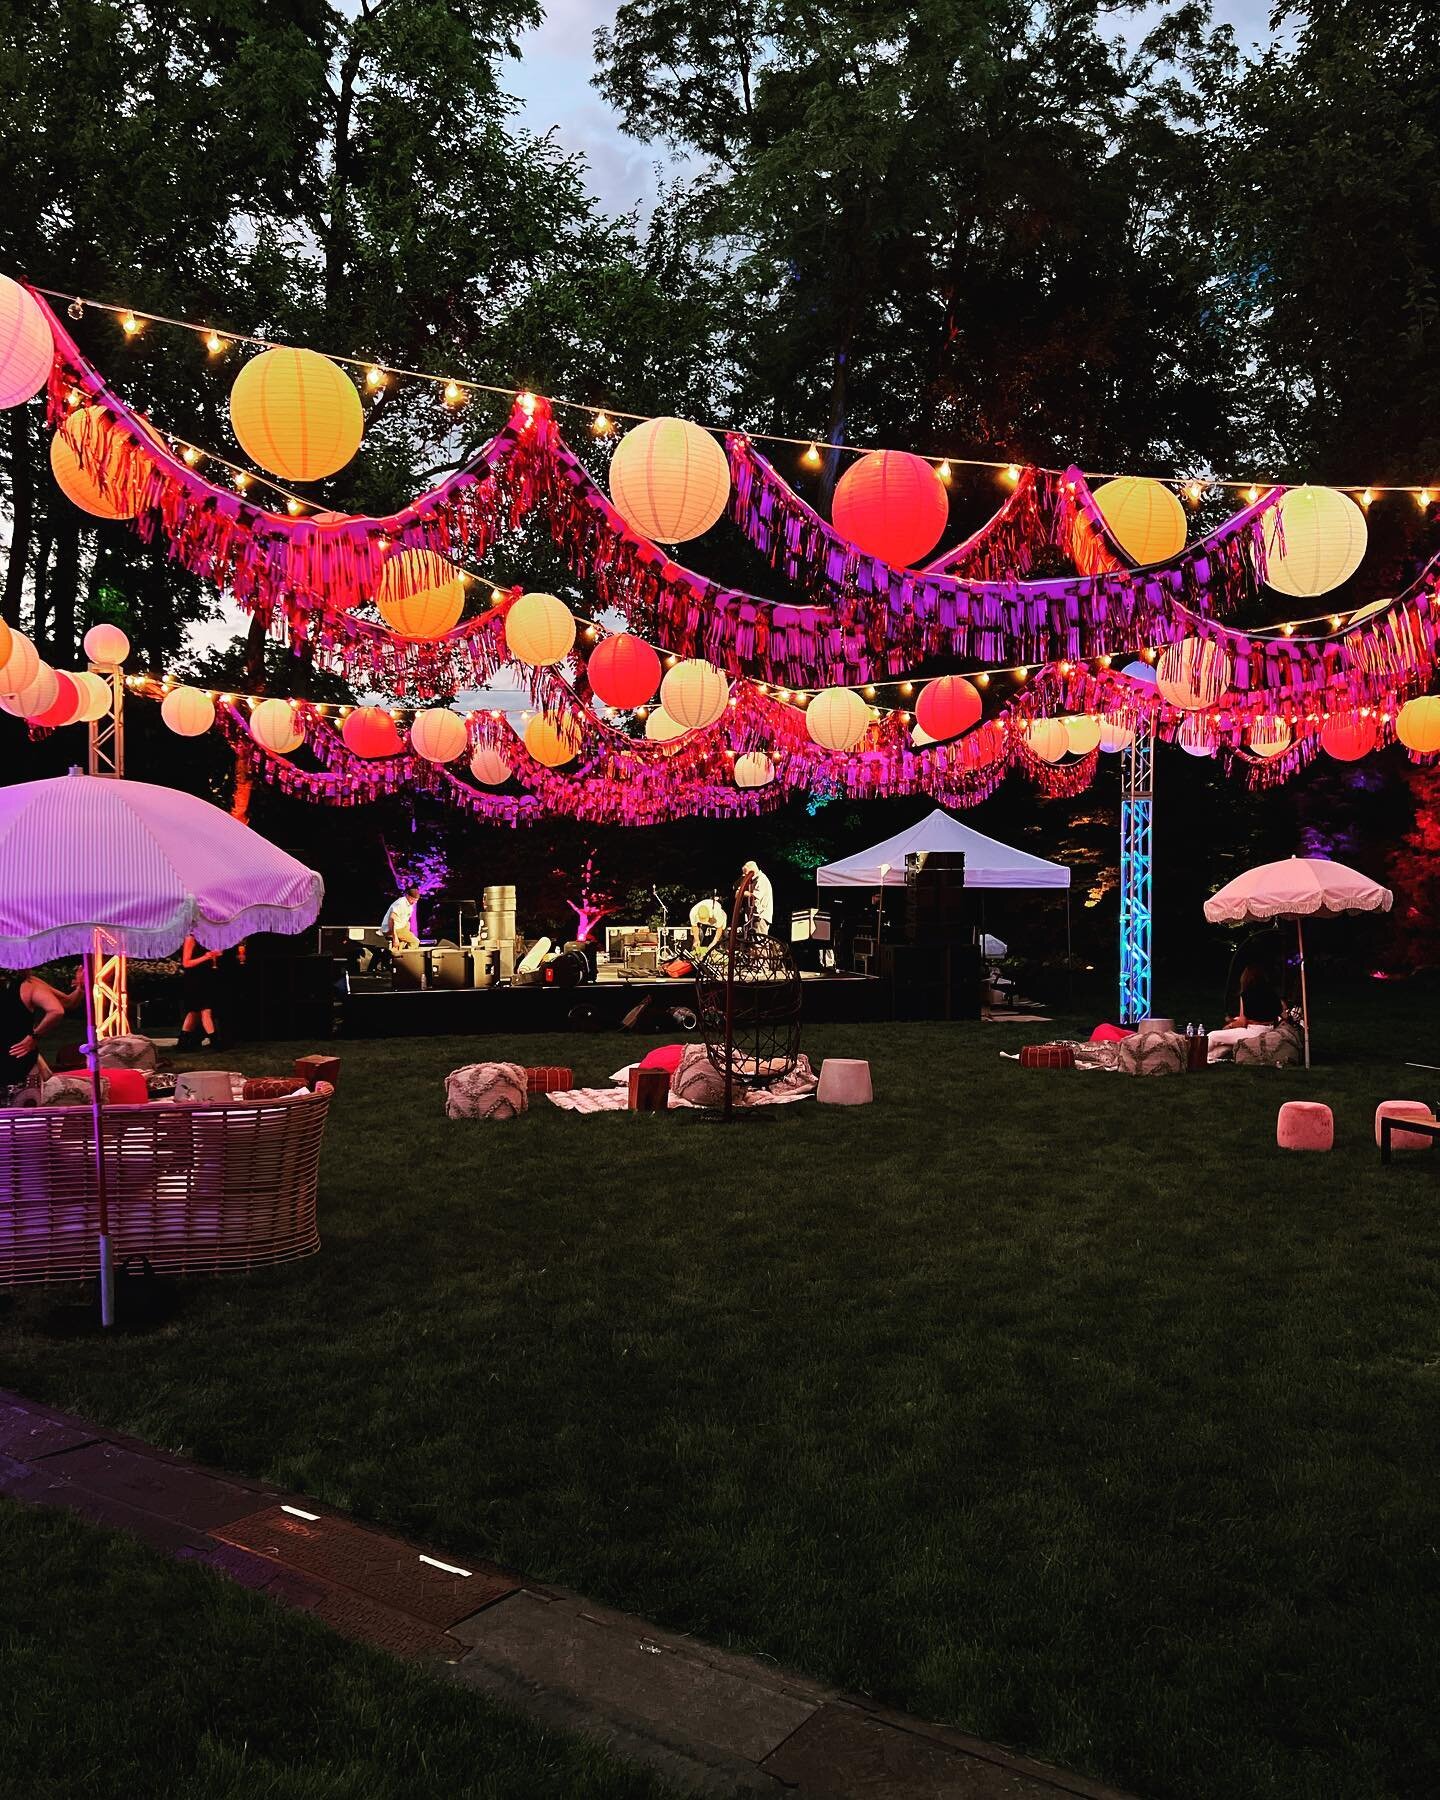 That evening glow tho.  Private concert with #poidogpondering (and DQ 😜)

Planning #racheldemarteevents 
Caterer @entertaining_co 
Decor @hmrdesigns @barianjali 
Lighting Sound @frostchicago @rjfozz 
Balloons @luft.balloon 
Champagne Truck @bellissi